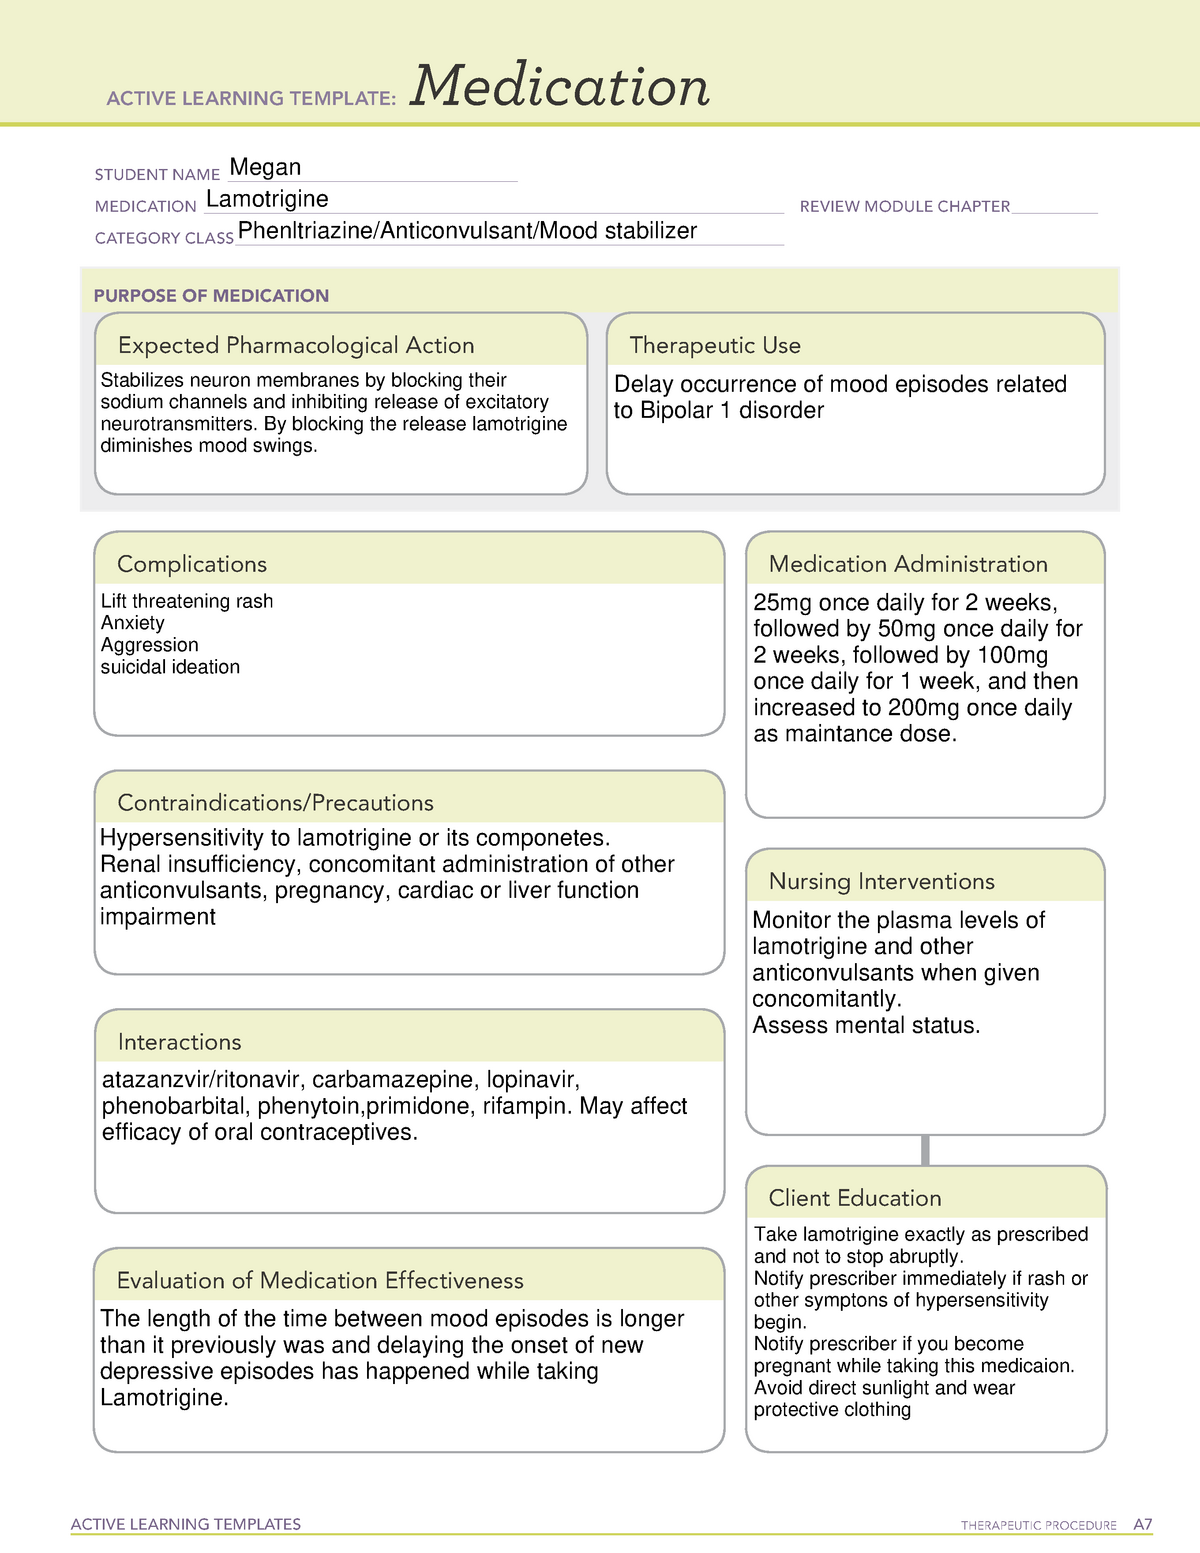 active-learning-template-medication-active-learning-templates